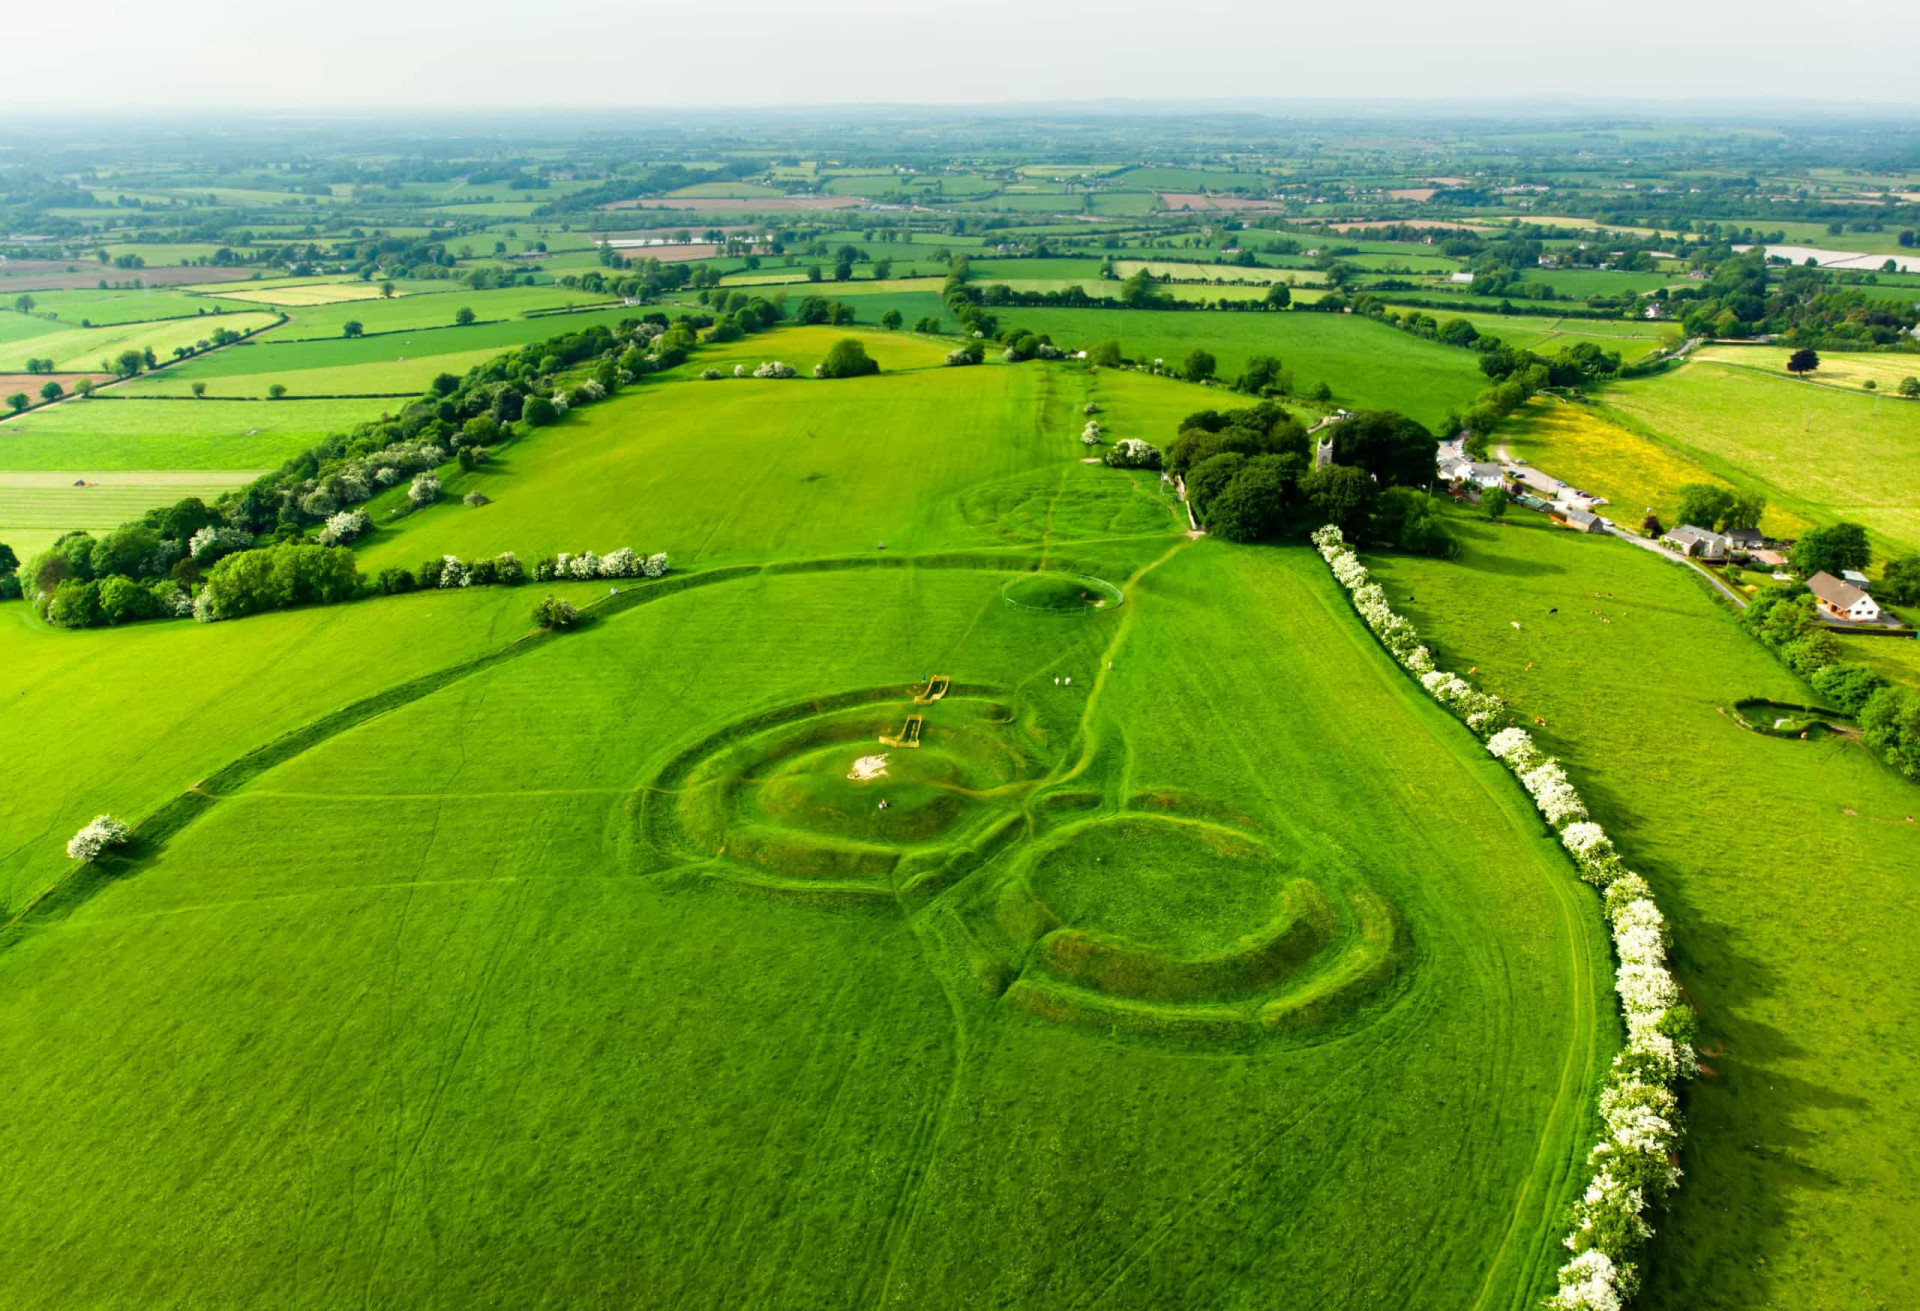 <p>On one occasion, Ireland was considered as the Ark's final destination. The Hill of Tara (pictured), an ancient ceremonial and burial site near Skryne in County Meath, was illegally excavated by British Israelites in the early 20th century in the belief that the hill contained the missing chest.</p><p><a href="https://www.msn.com/en-ph/community/channel/vid-7xx8mnucu55yw63we9va2gwr7uihbxwc68fxqp25x6tg4ftibpra?cvid=94631541bc0f4f89bfd59158d696ad7e">Follow us and access great exclusive content every day</a></p>